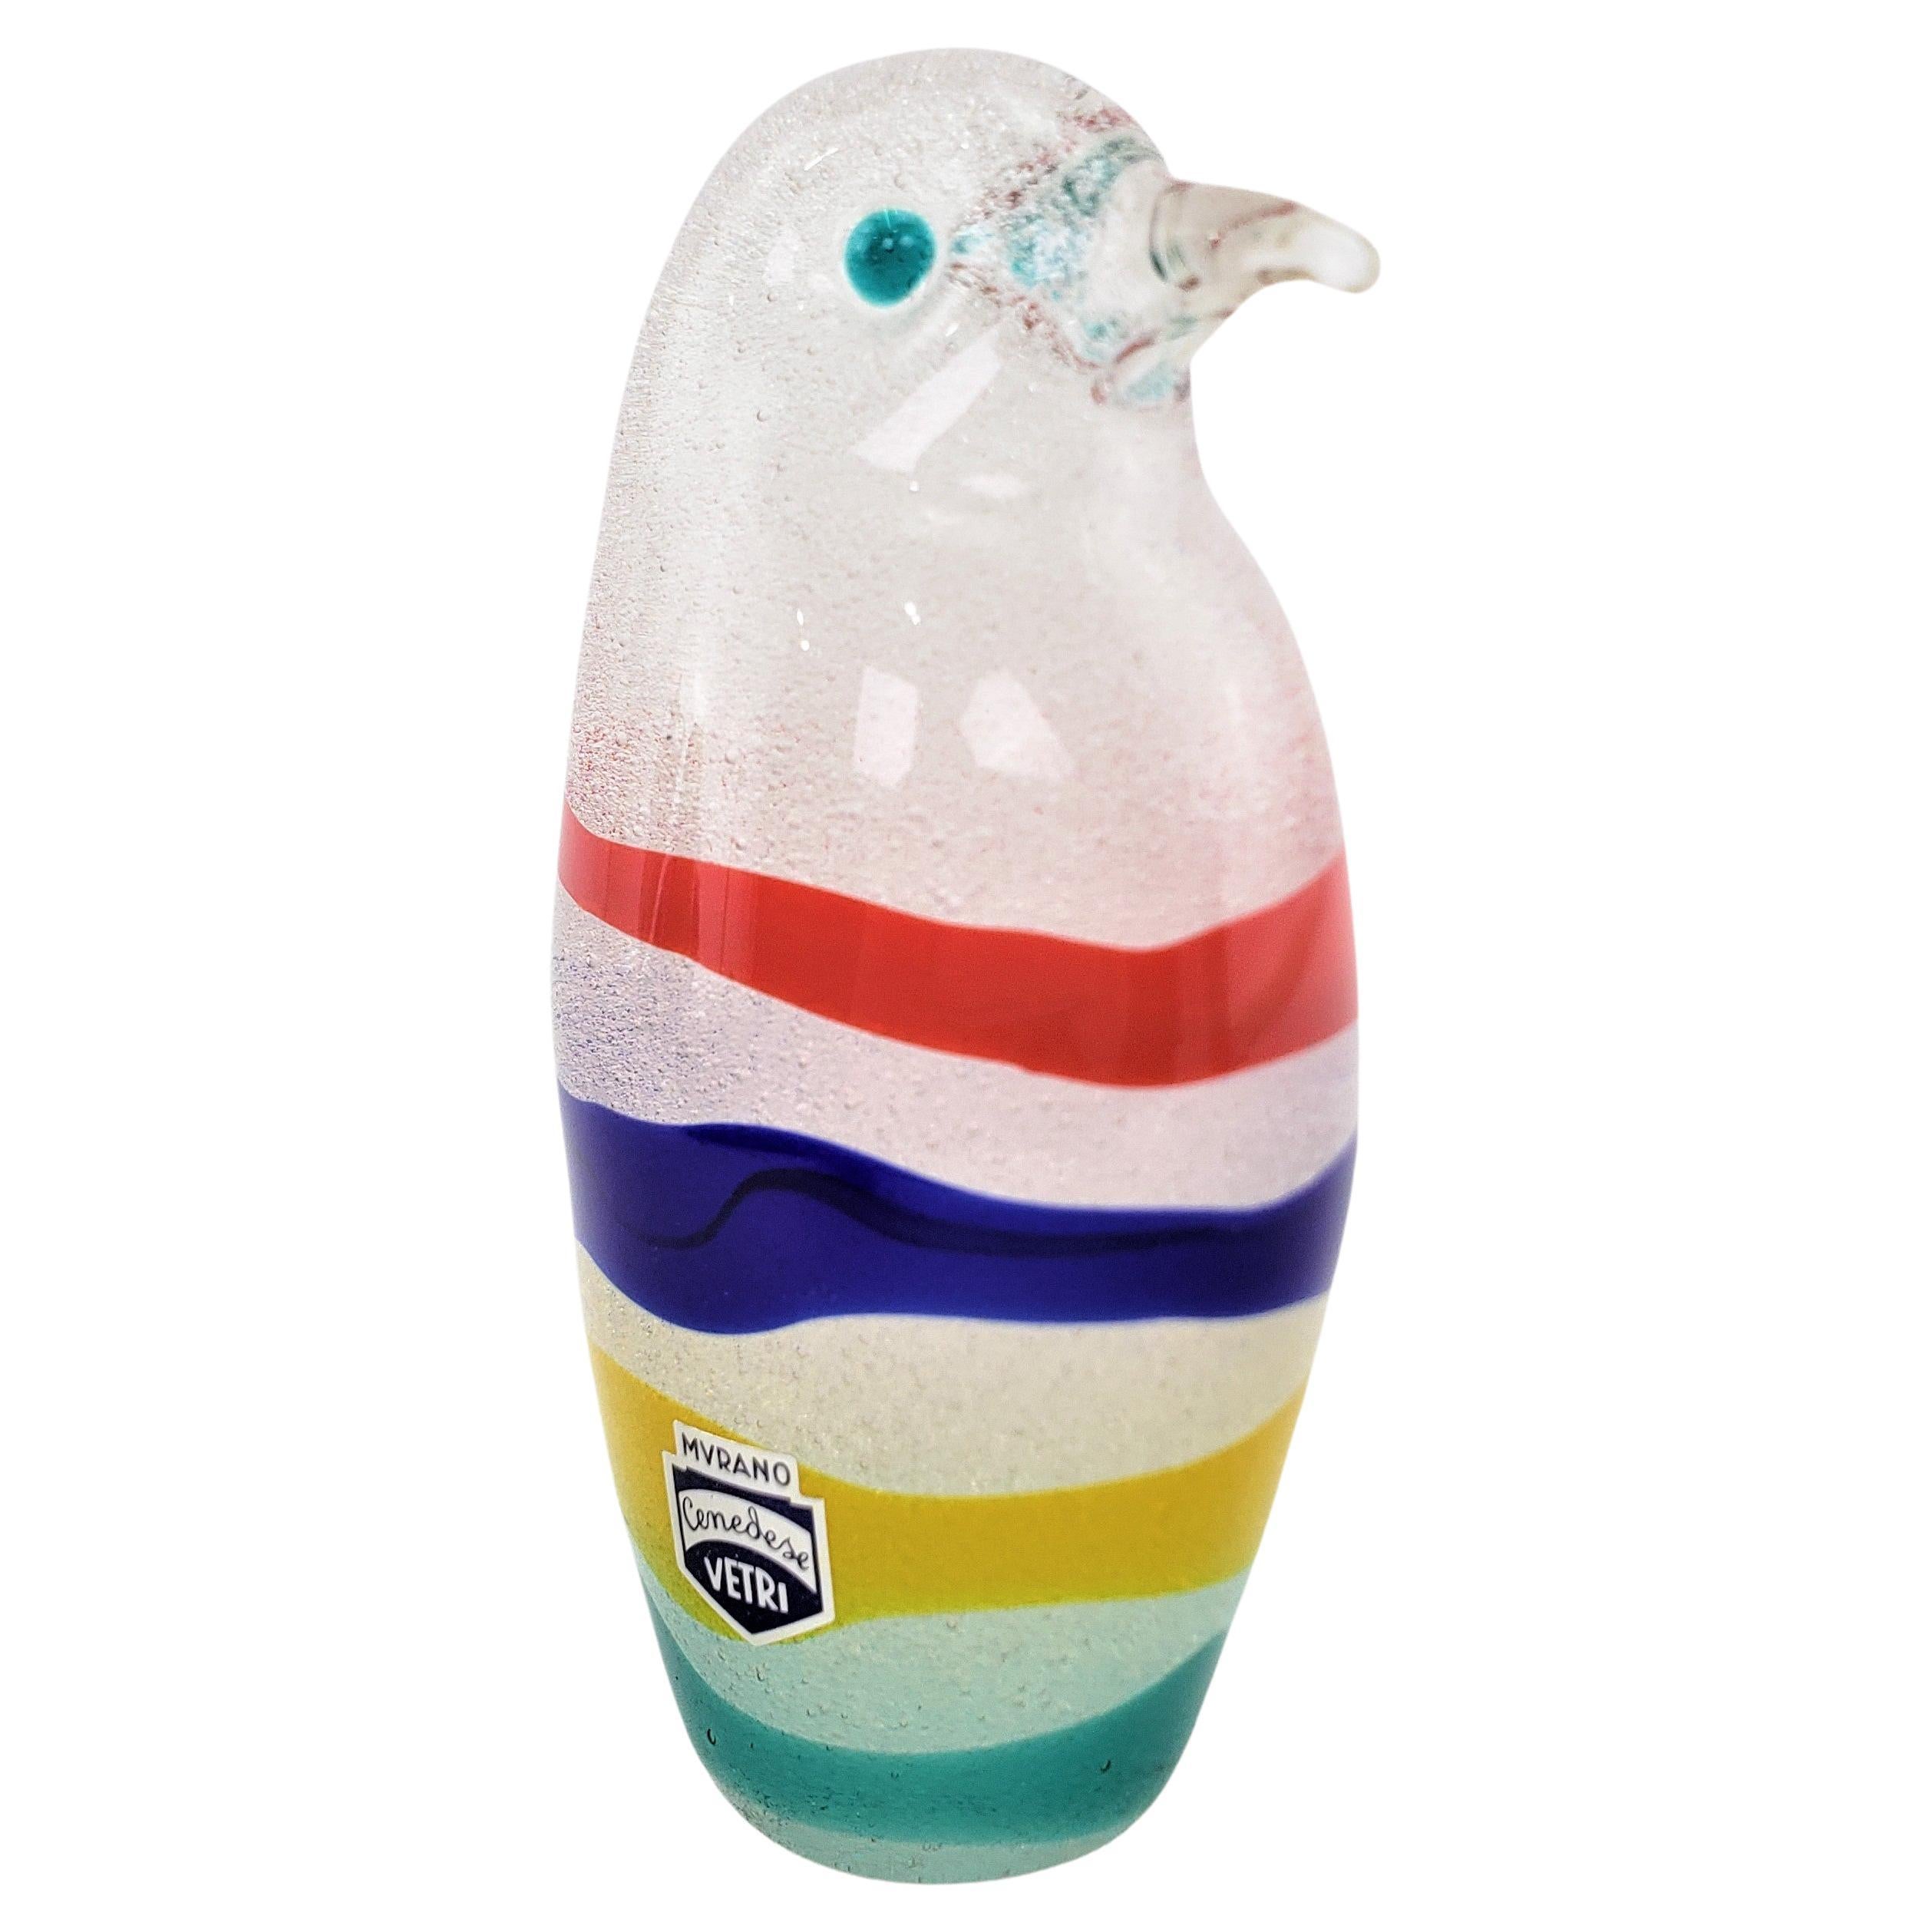 This art glass penguin figurine was made by the renowned Cenedese art glass factory of Murano Italy in approximately 1965 in a period Mid-Century modern style. The sculpture is done with thick hand formed glass with multi-colored bands around the